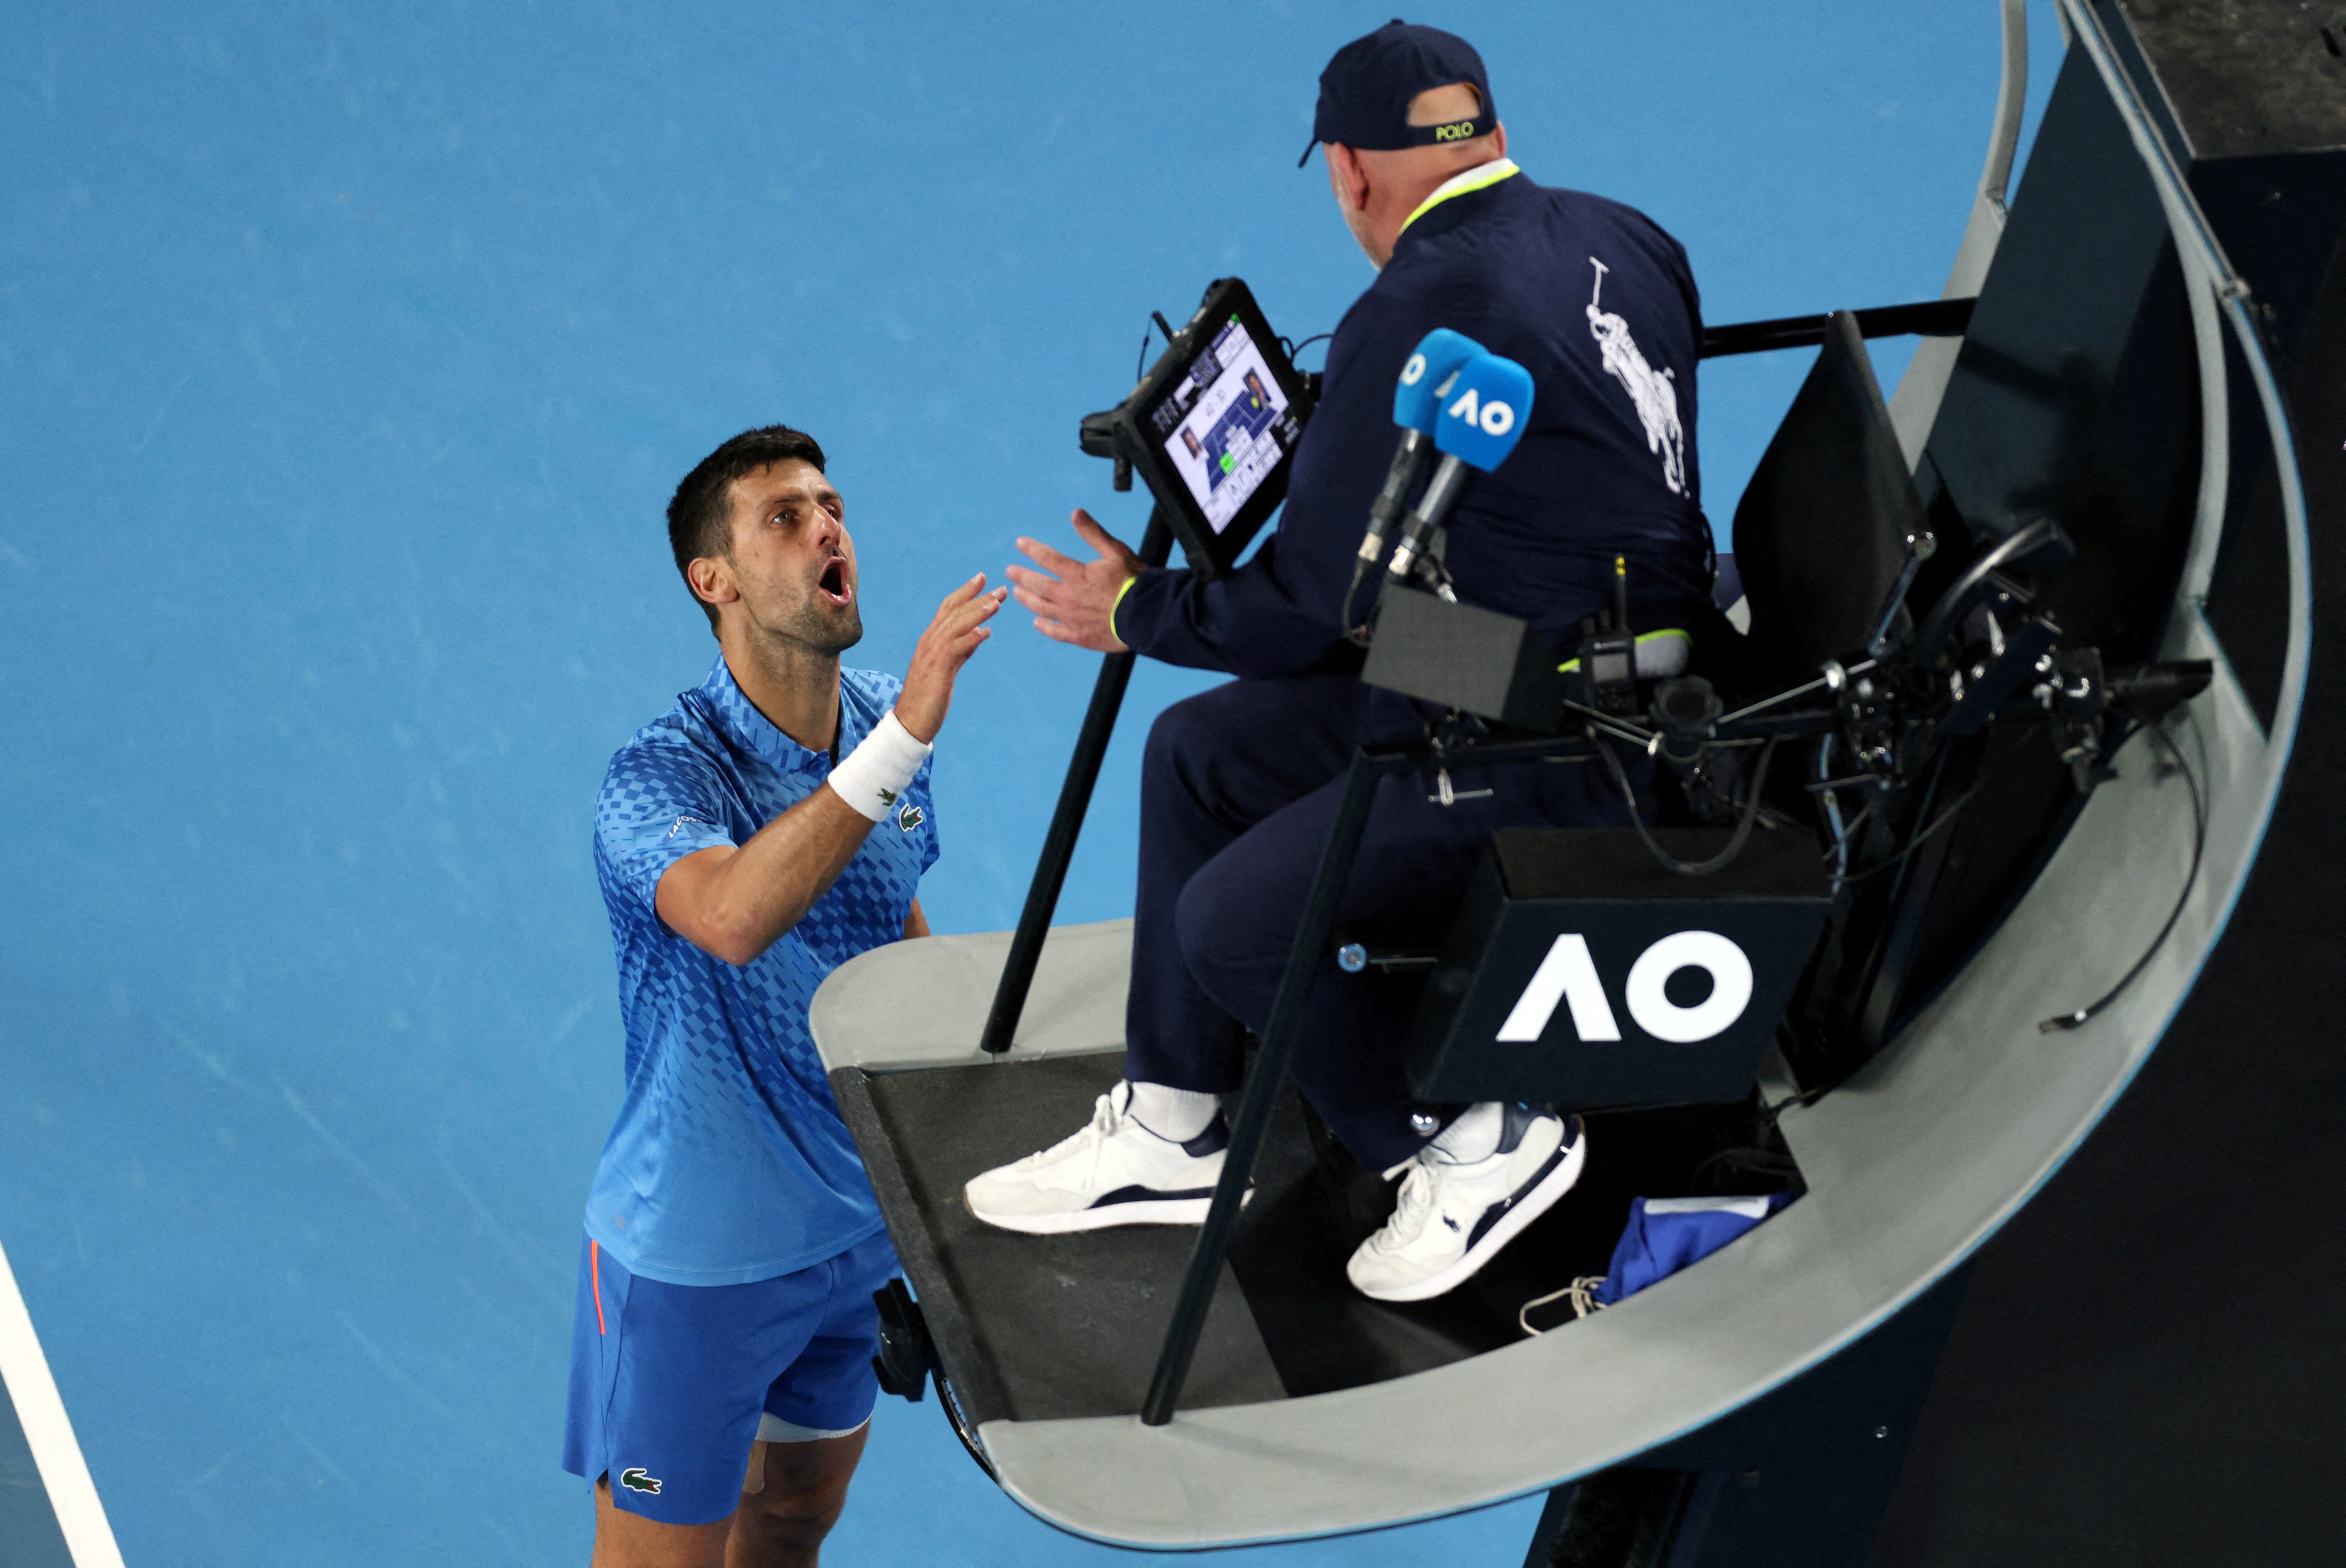 Tennis - Australian Open - Melbourne Park, Melbourne, Australia - January 19, 2023 Serbia's Novak Djokovic remonstrates with the umpire during his second round match against France's Enzo Couacaud REUTERS/Loren Elliott     TPX IMAGES OF THE DAY